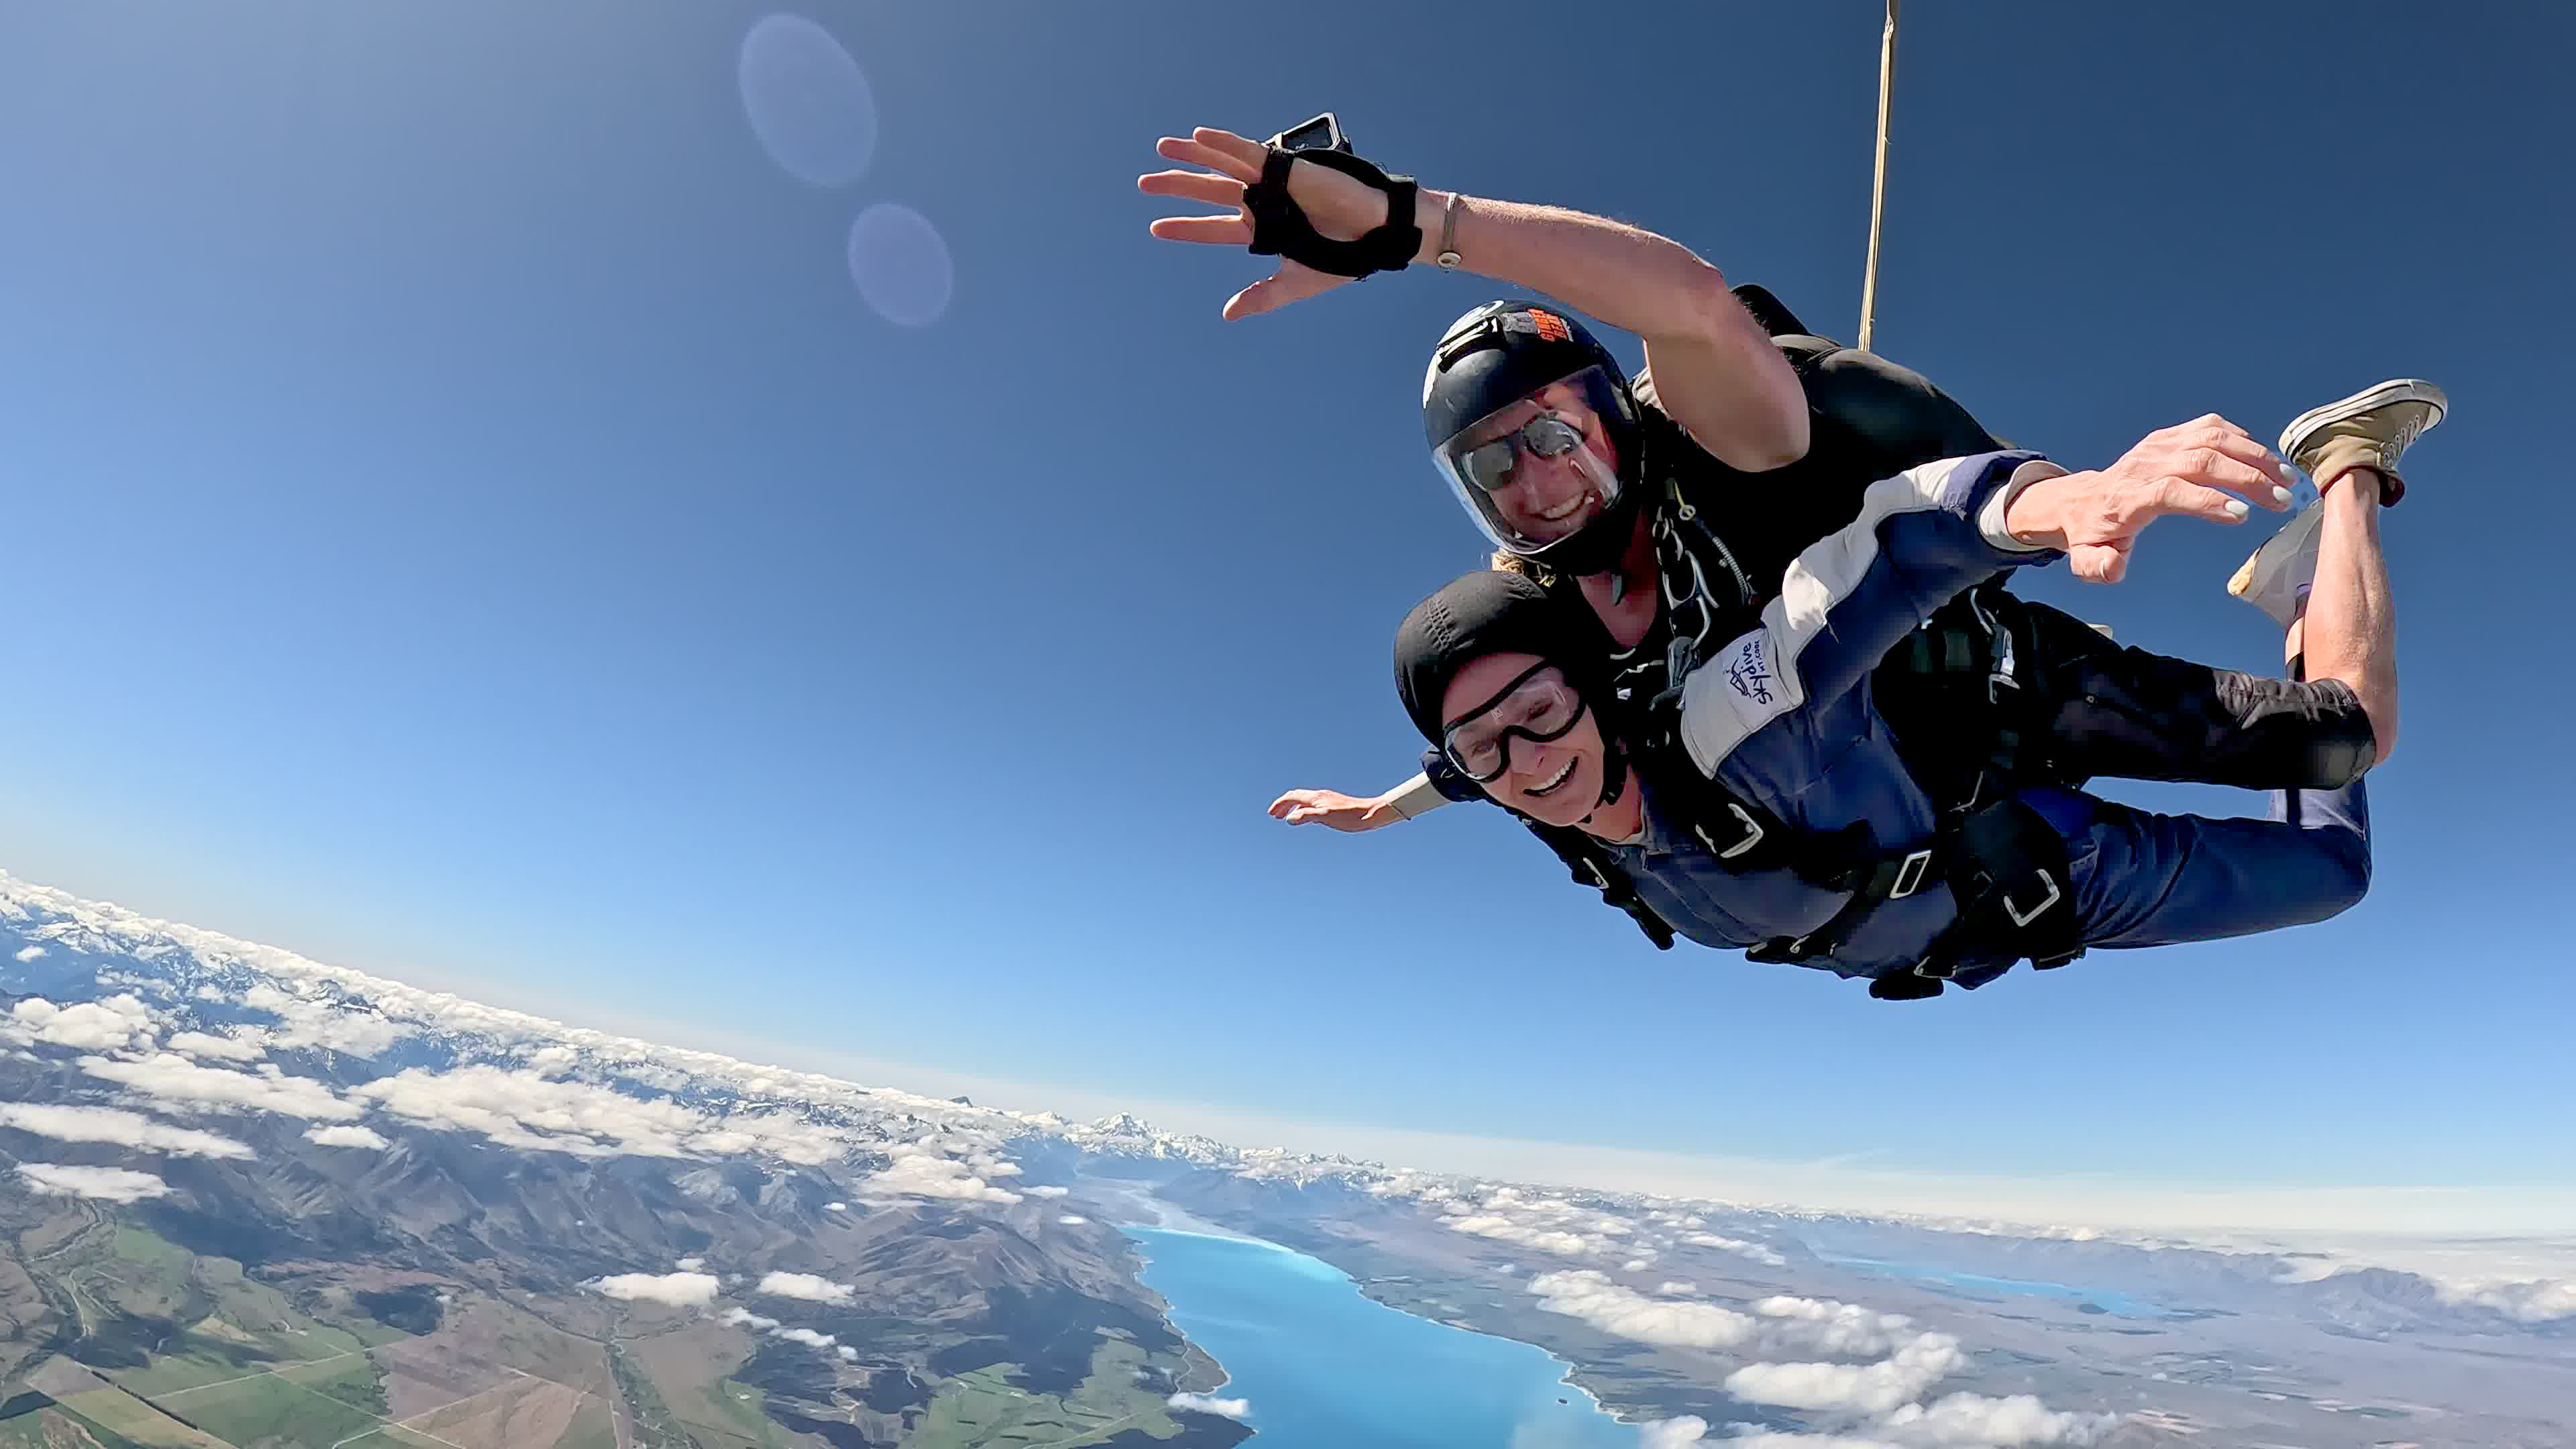 Skydive Mount Cook tandem skydive freefall woman